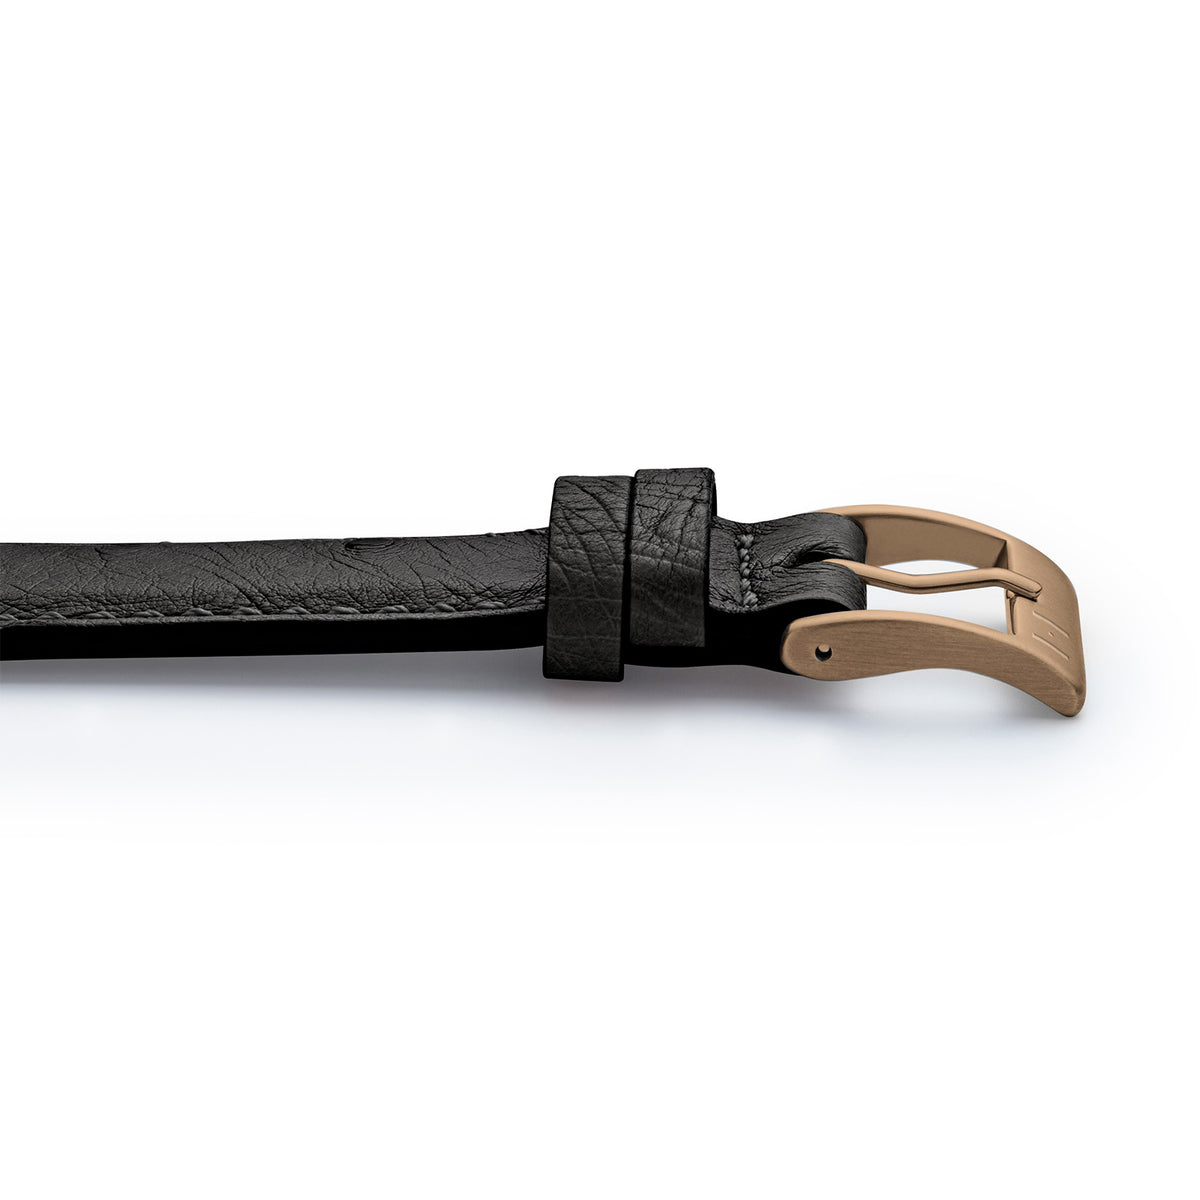 Apple Watch leather strap made of ostrich leather &quot;OBERKASSEL&quot; - black